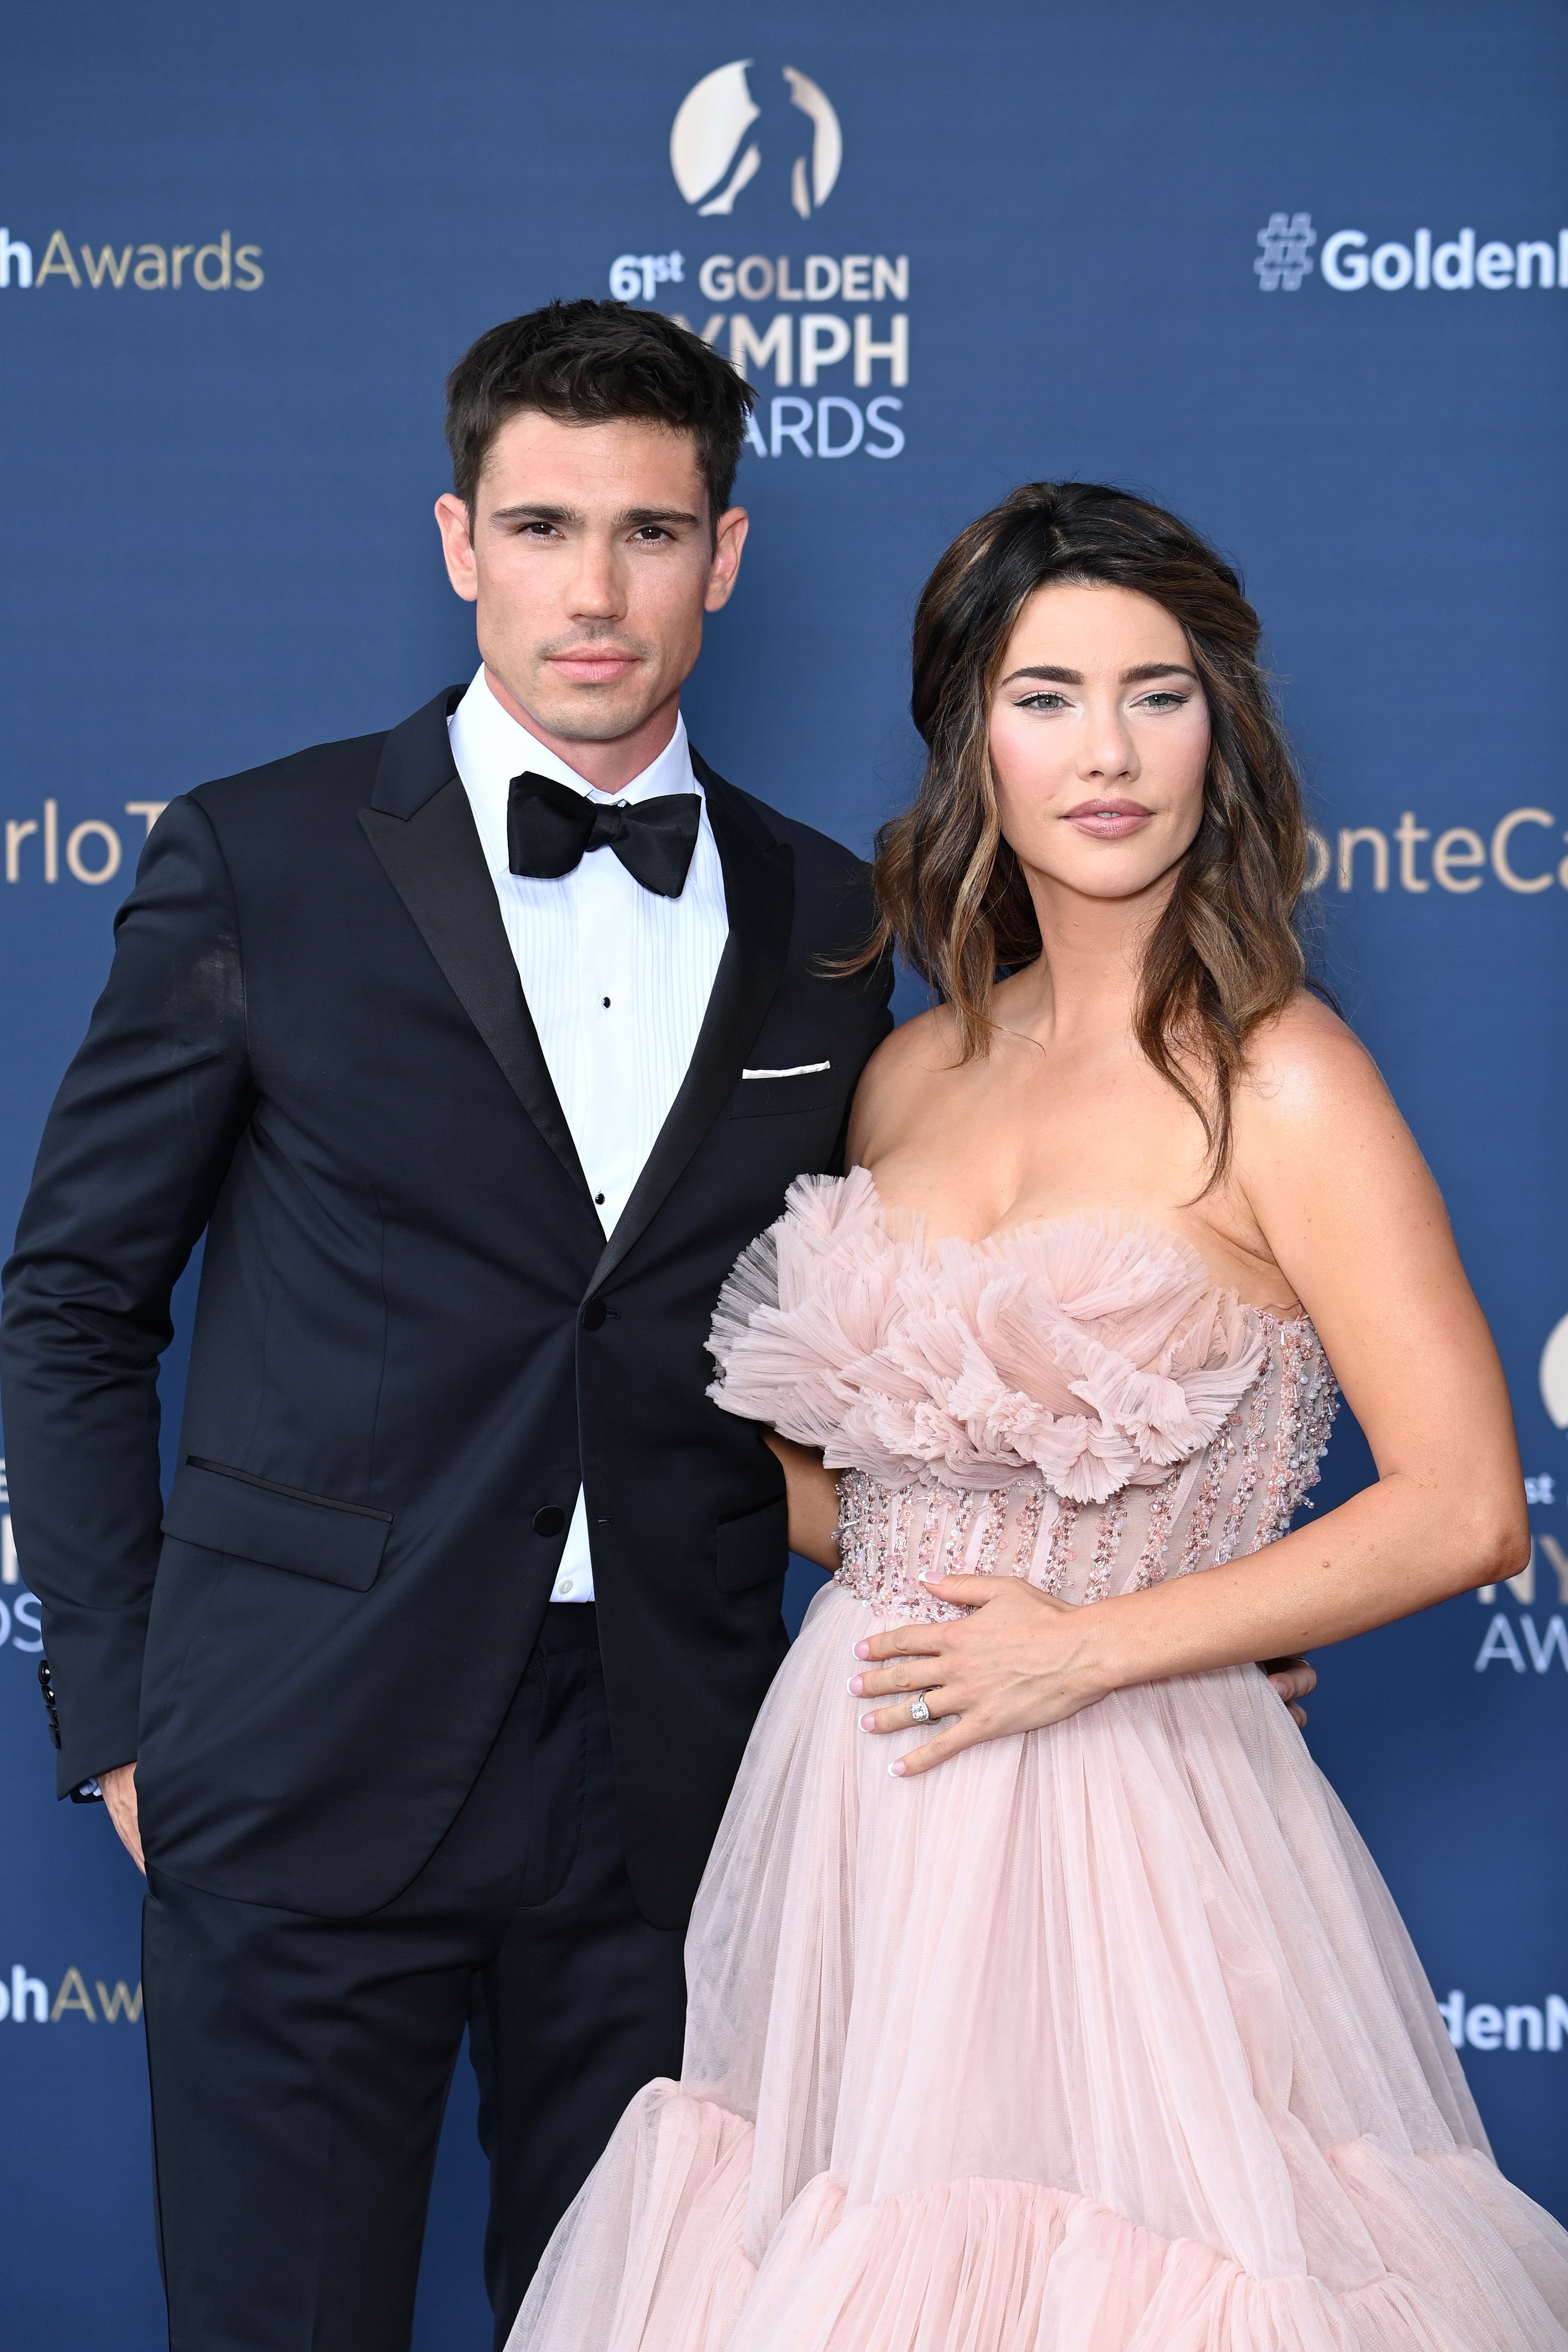 'The Bold and the Beautiful' couple Steffy and Finn will have a romantic reunion in Monaco.